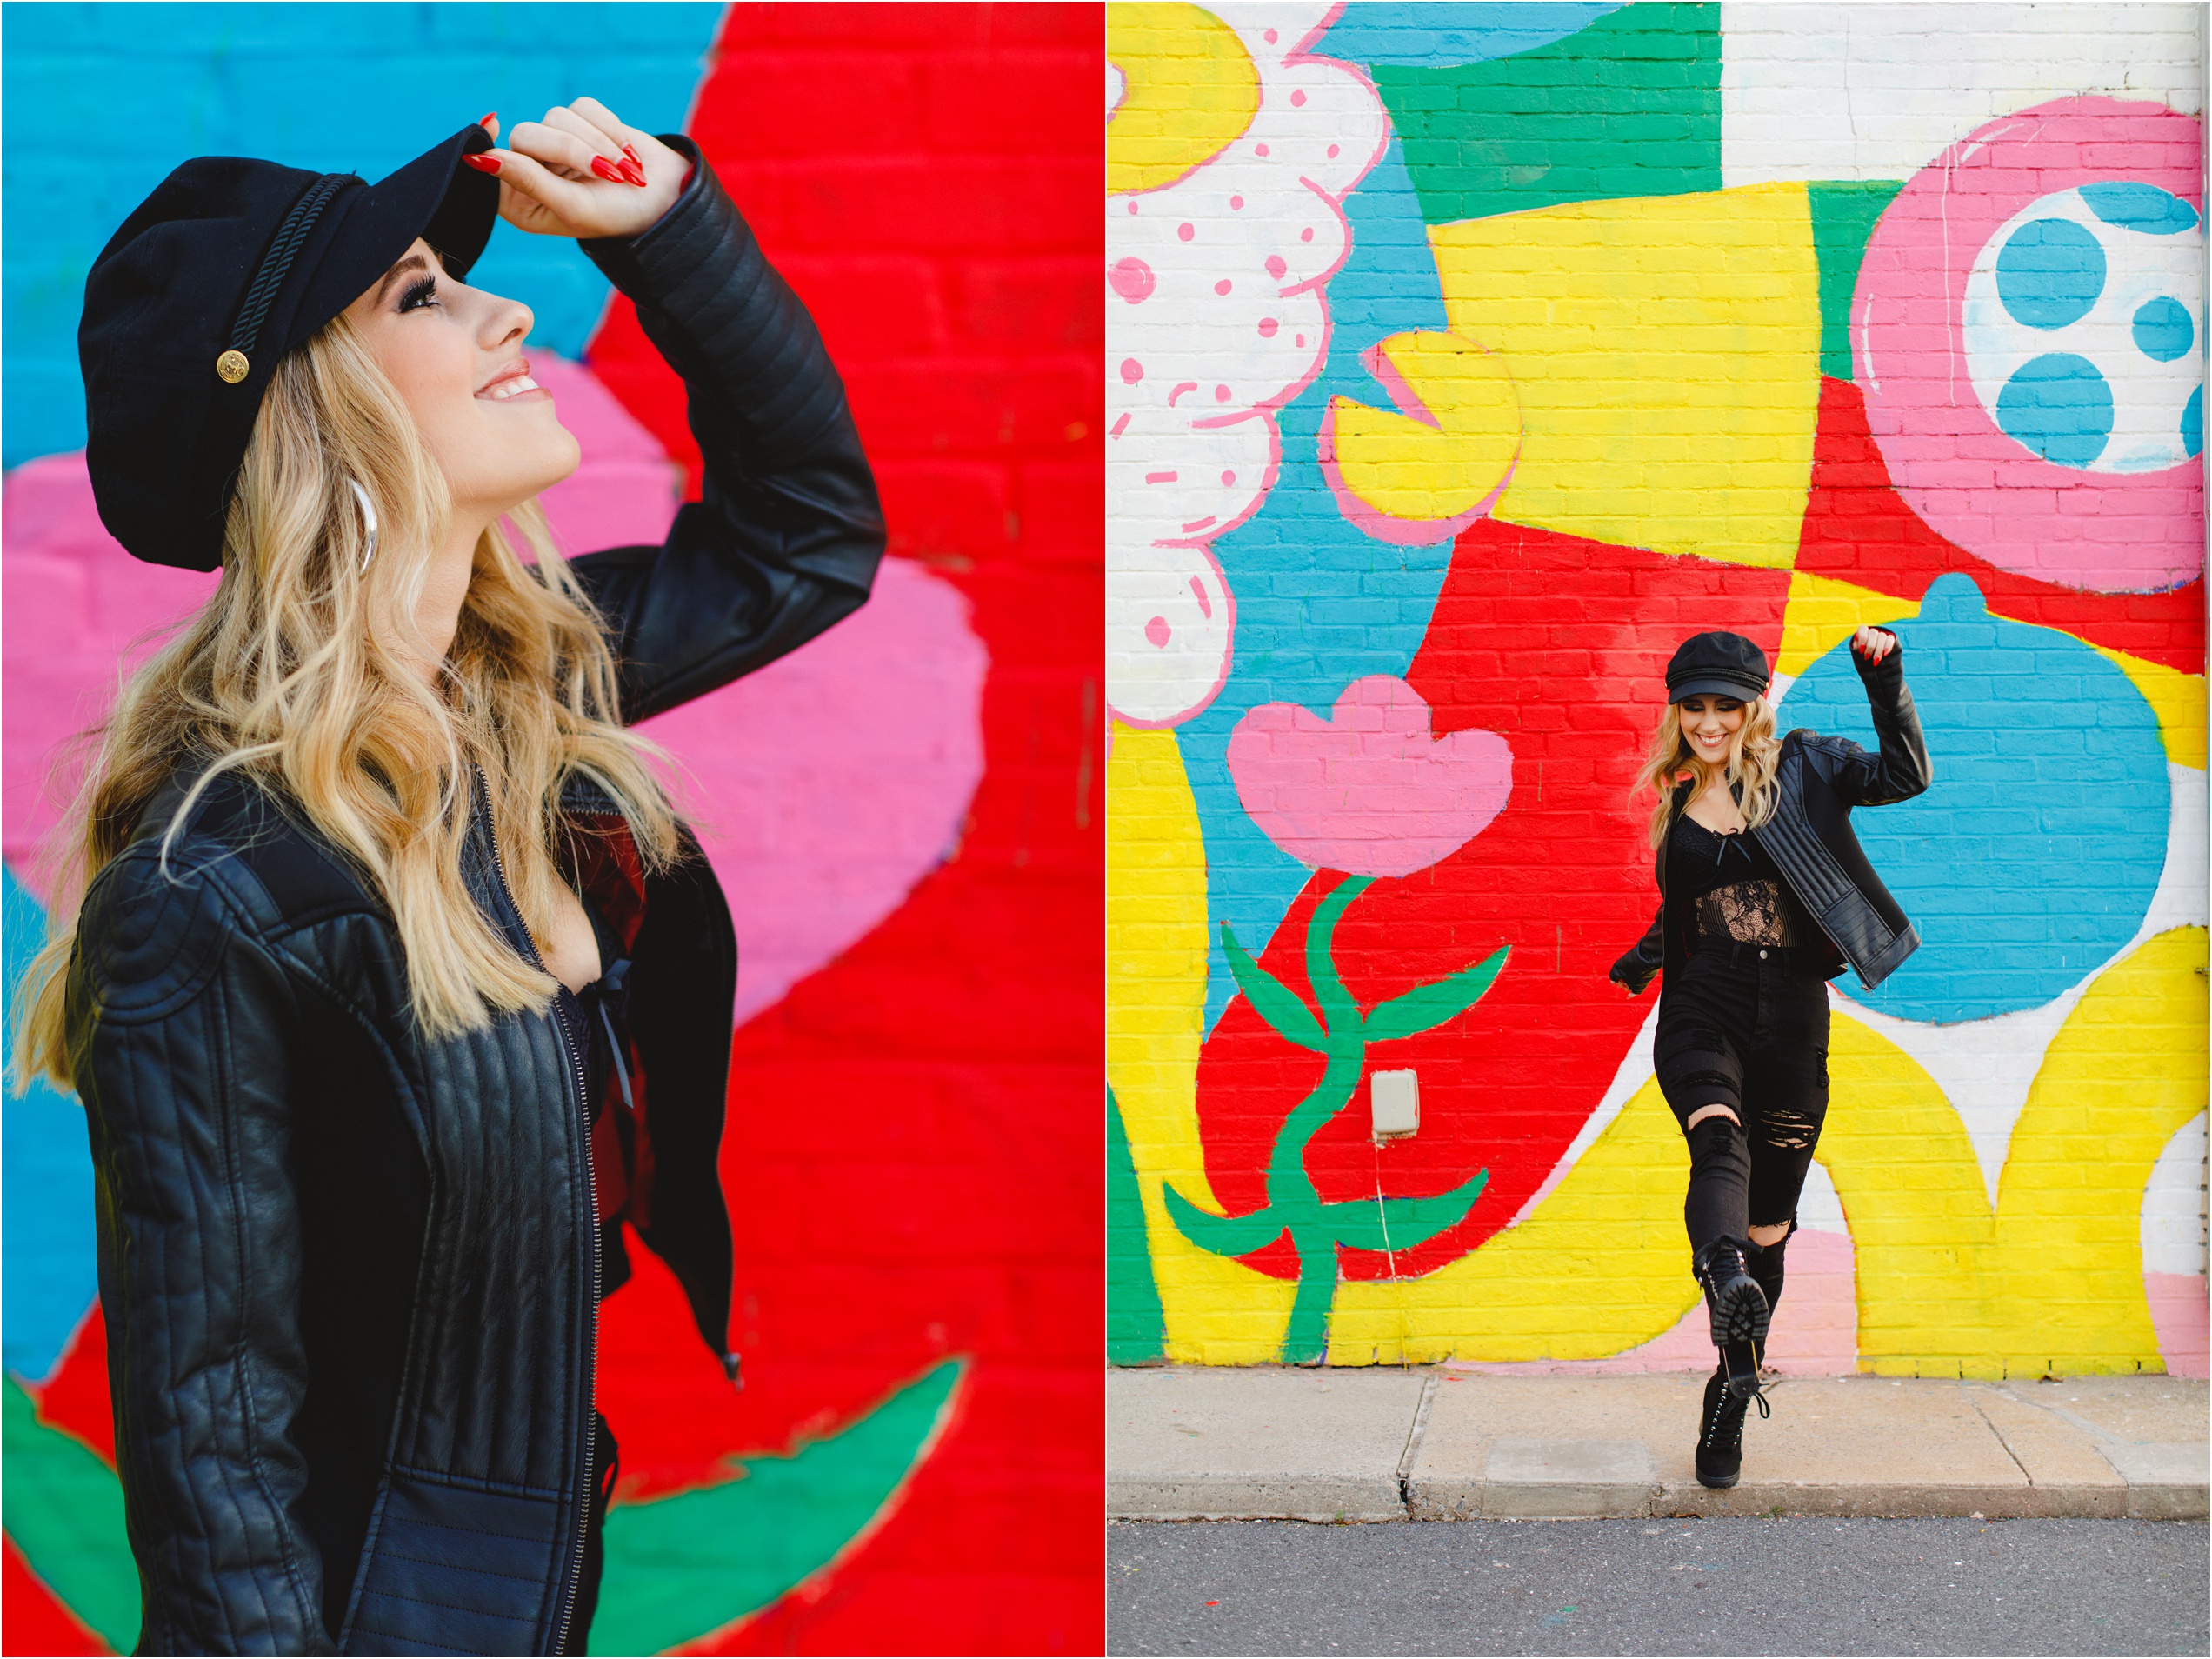 Andrina smiling as she tips her black hat and dancing in an all black outfit in front of a colorful mural.